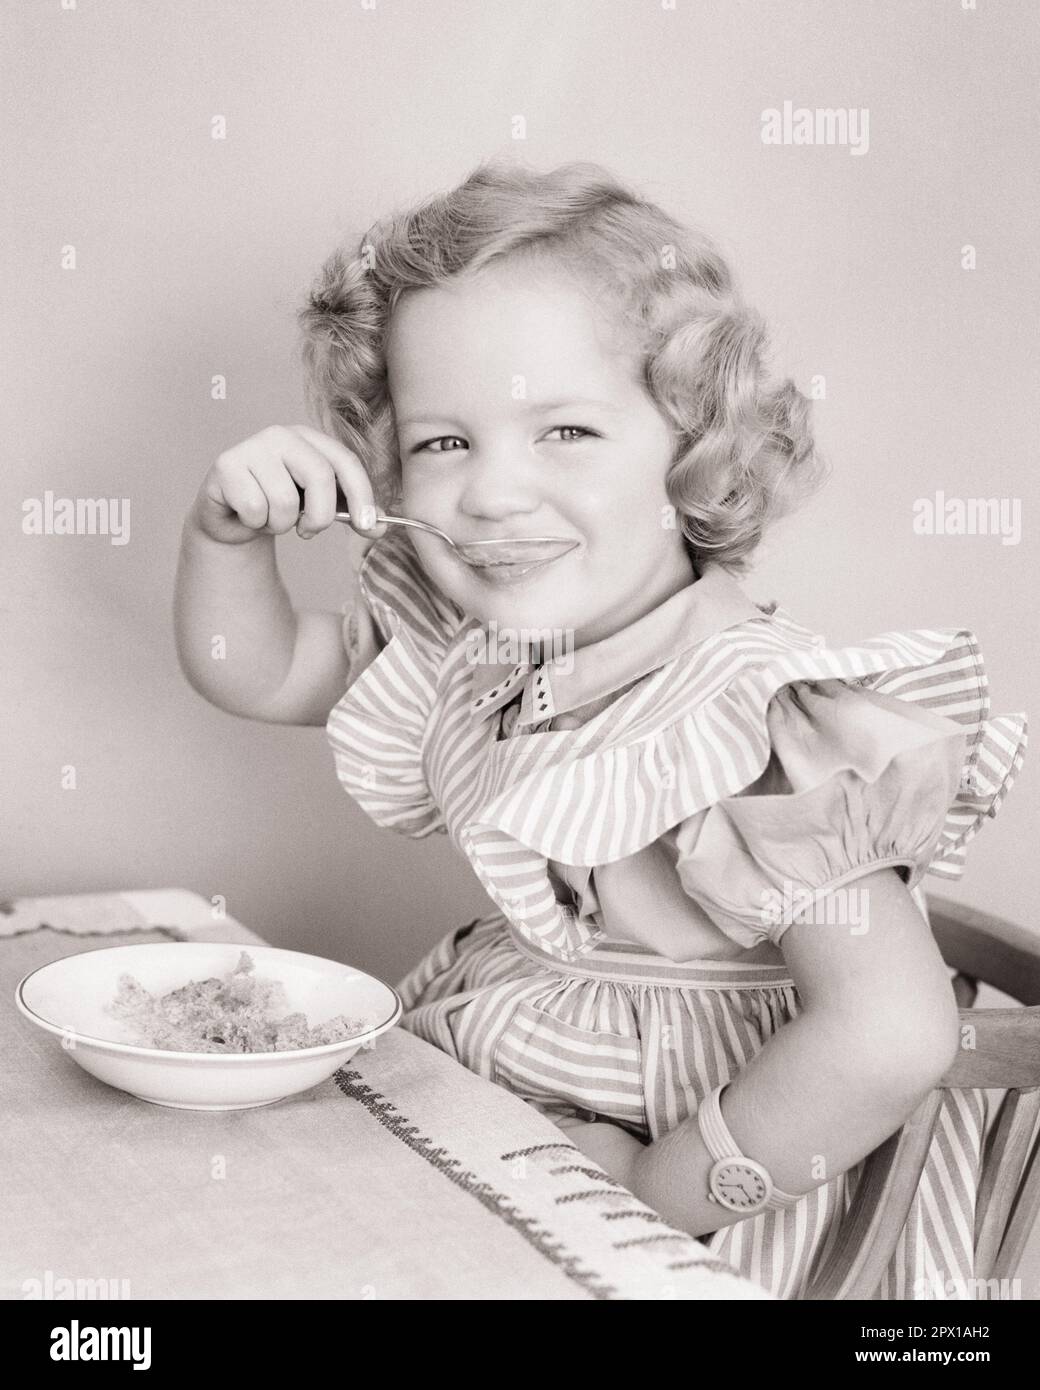 1940s CUTE SMILING LITTLE GIRL IN FANCY DRESS LOOKING AT CAMERA EATING BREAKFAST CEREAL - f2242 HAR001 HARS HALF-LENGTH FANCY STRIPES CONFIDENCE B&W EYE CONTACT HAPPINESS WELLNESS NUTRITION CONSUME CONSUMING NOURISHMENT STYLISH PINAFORE PLEASANT AGREEABLE CHARMING COOPERATION GROWTH JUVENILES LOVABLE PLEASING ADORABLE APPEALING BLACK AND WHITE CAUCASIAN ETHNICITY HAR001 OLD FASHIONED Stock Photo